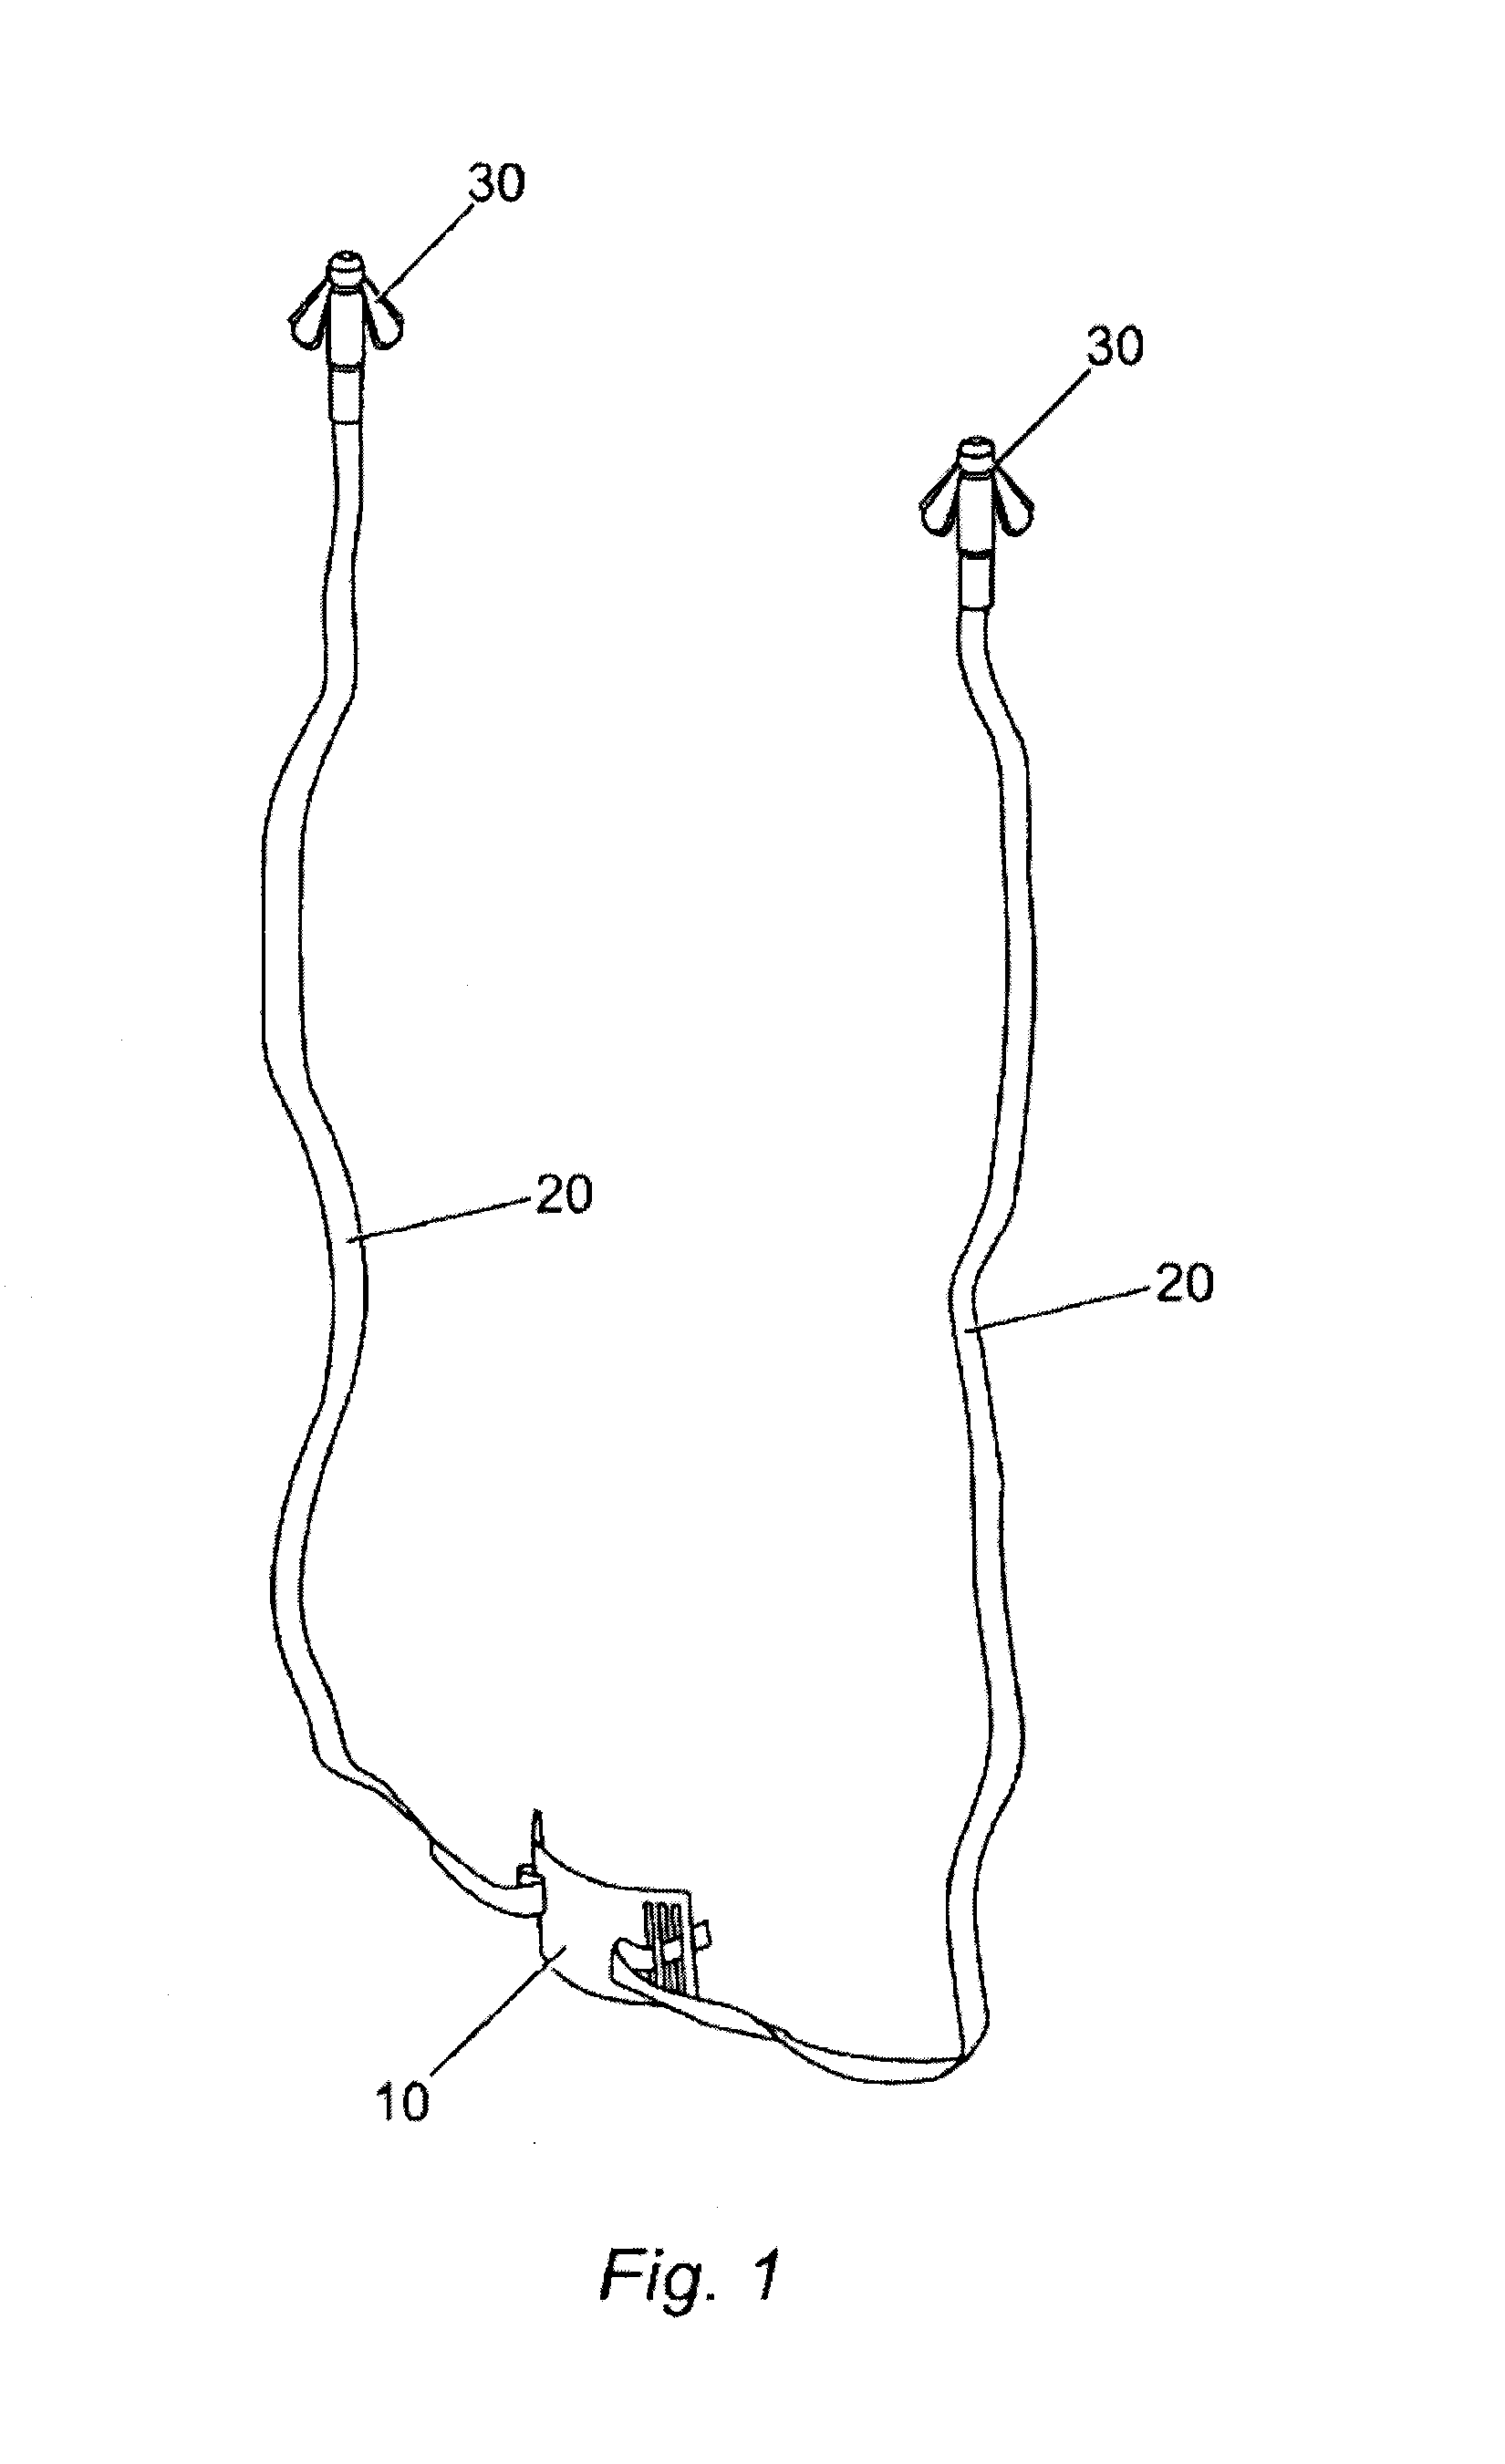 Method for fibrous anchoring of a pelvic support